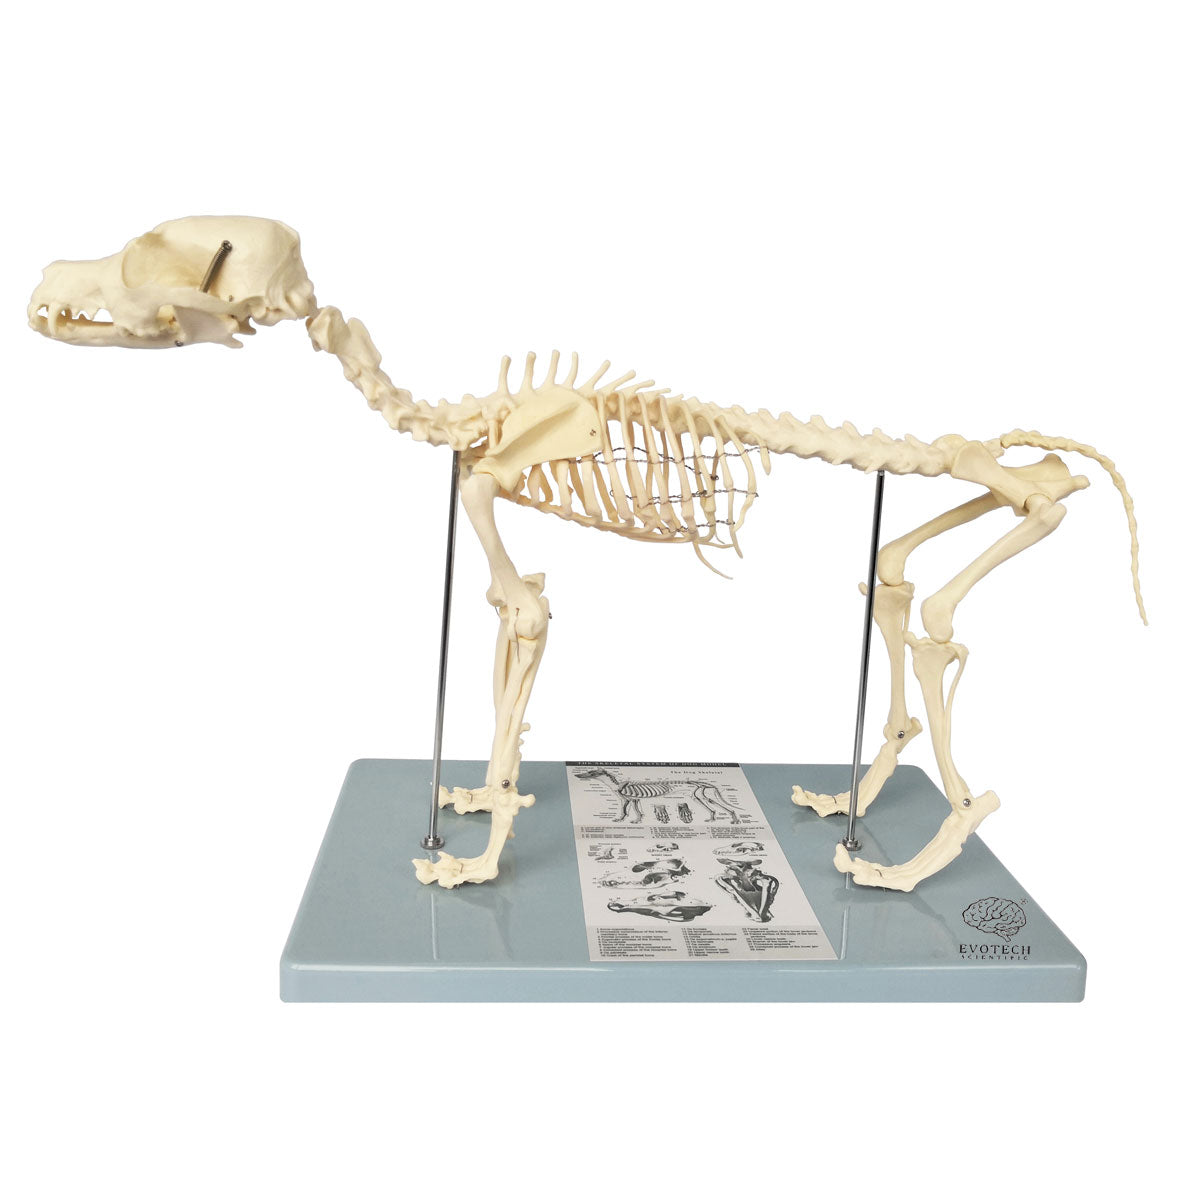 Evotech Scientific Dog Skeletal Anatomical Model Life-size 12" Tall Mounted to Base